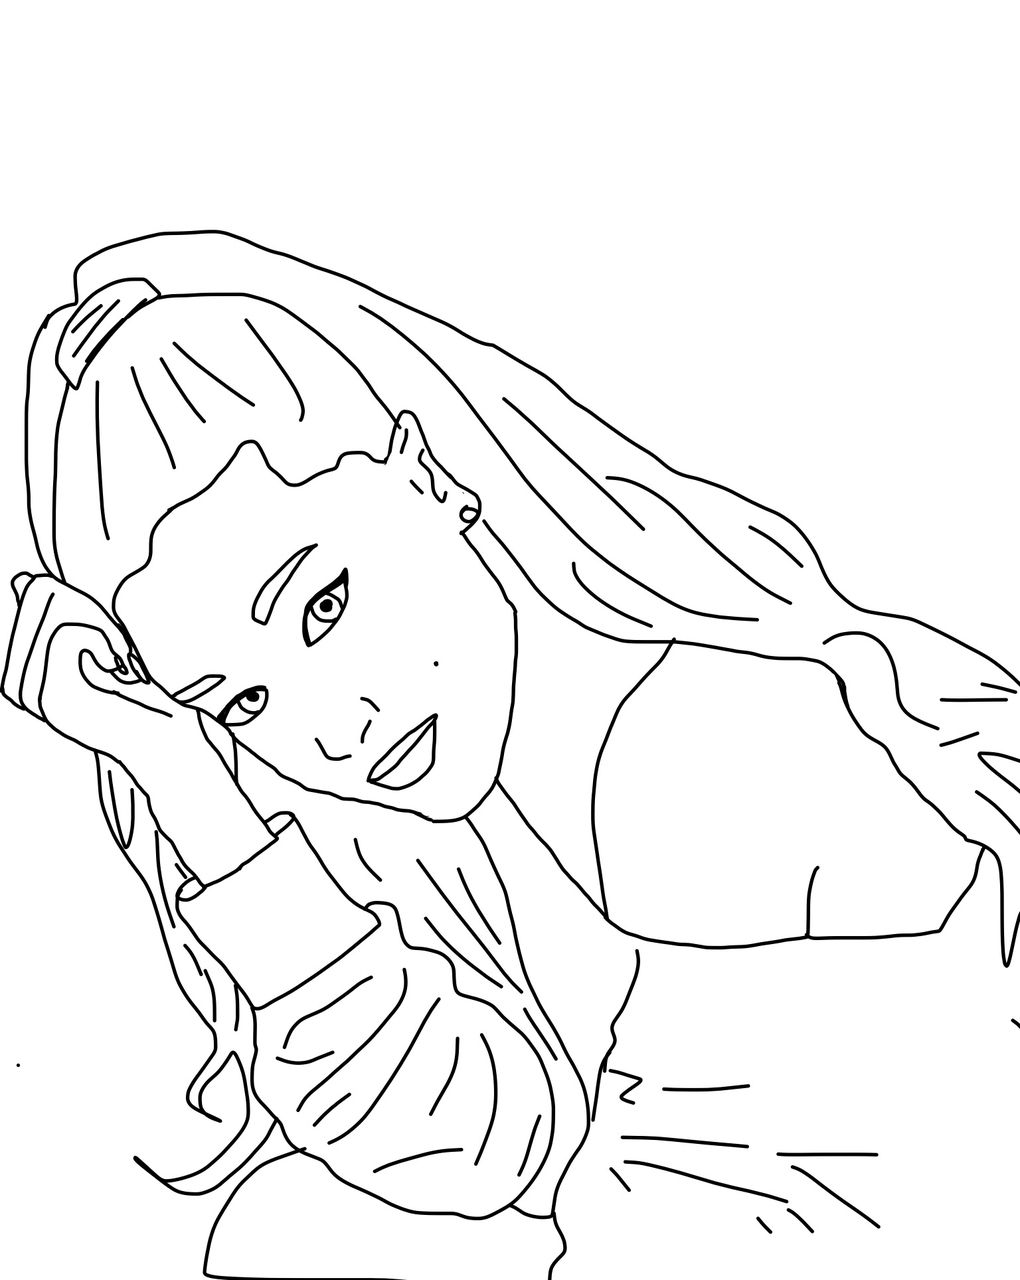 Printable Ariana Grande Coloring Pages Pdf - Printable Ariana Grande Coloring Pages